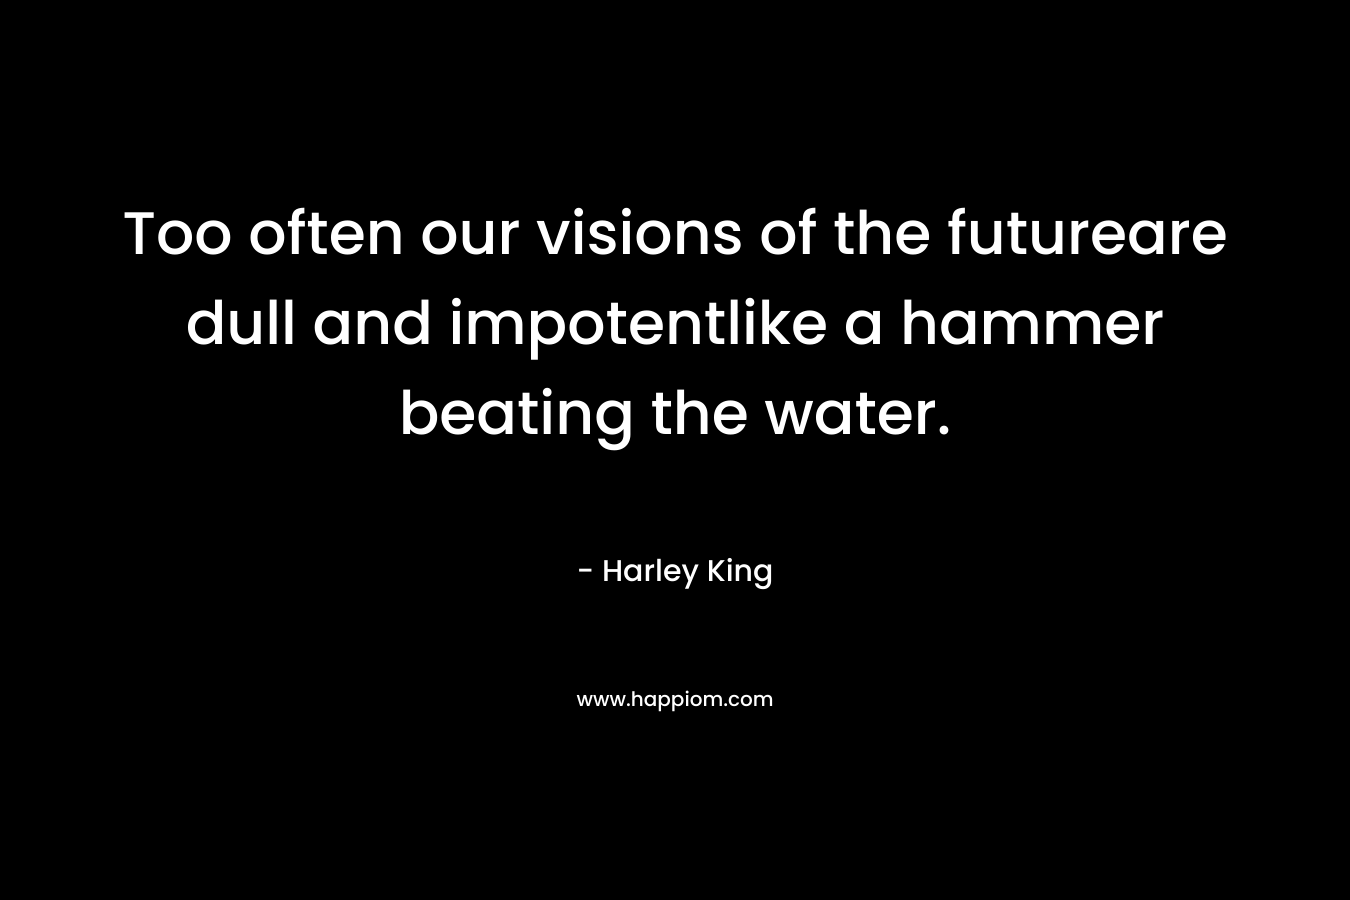 Too often our visions of the futureare dull and impotentlike a hammer beating the water. – Harley King